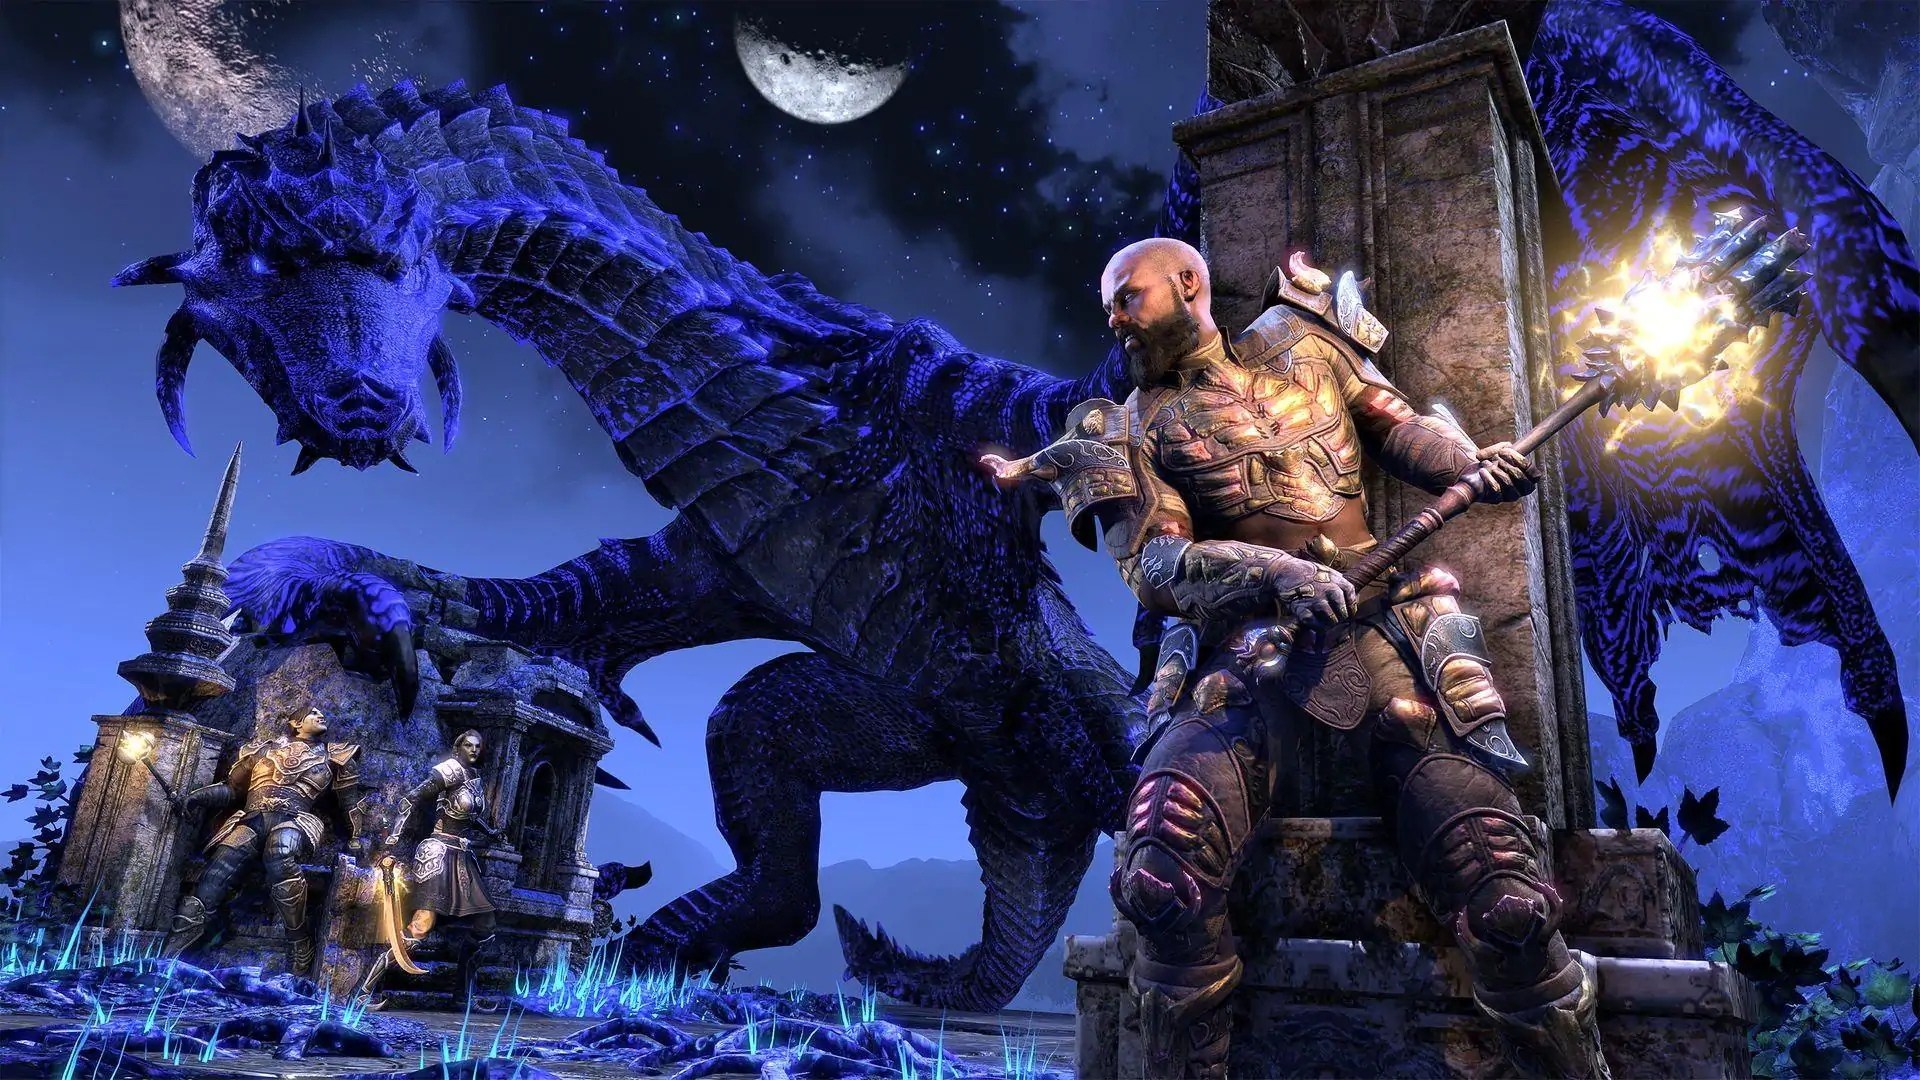 Undaunted Event Returns To Elder Scrolls Online After Technical Issues